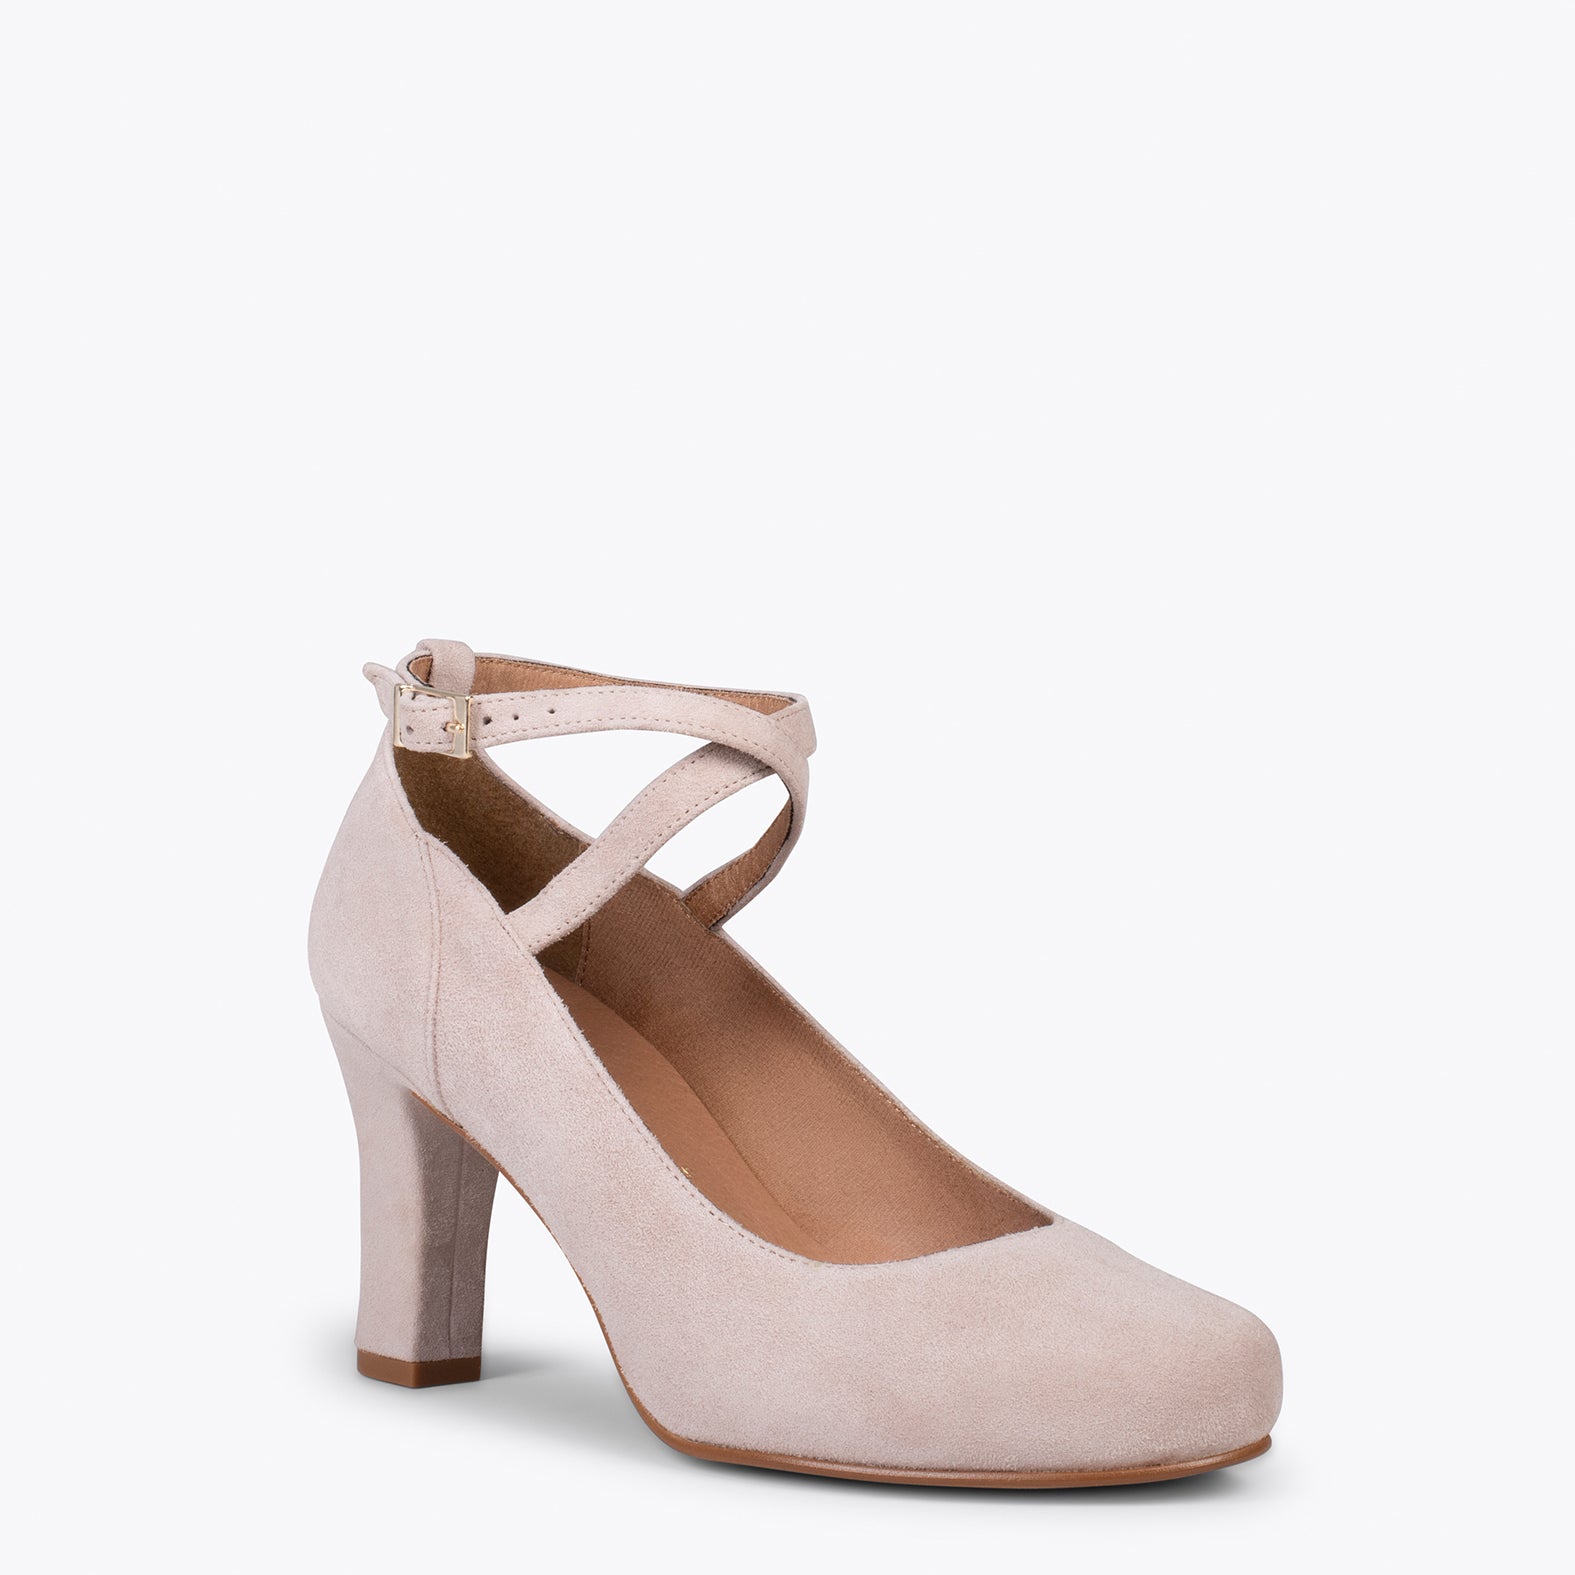 STRAPS – NUDE high heels with crossed straps